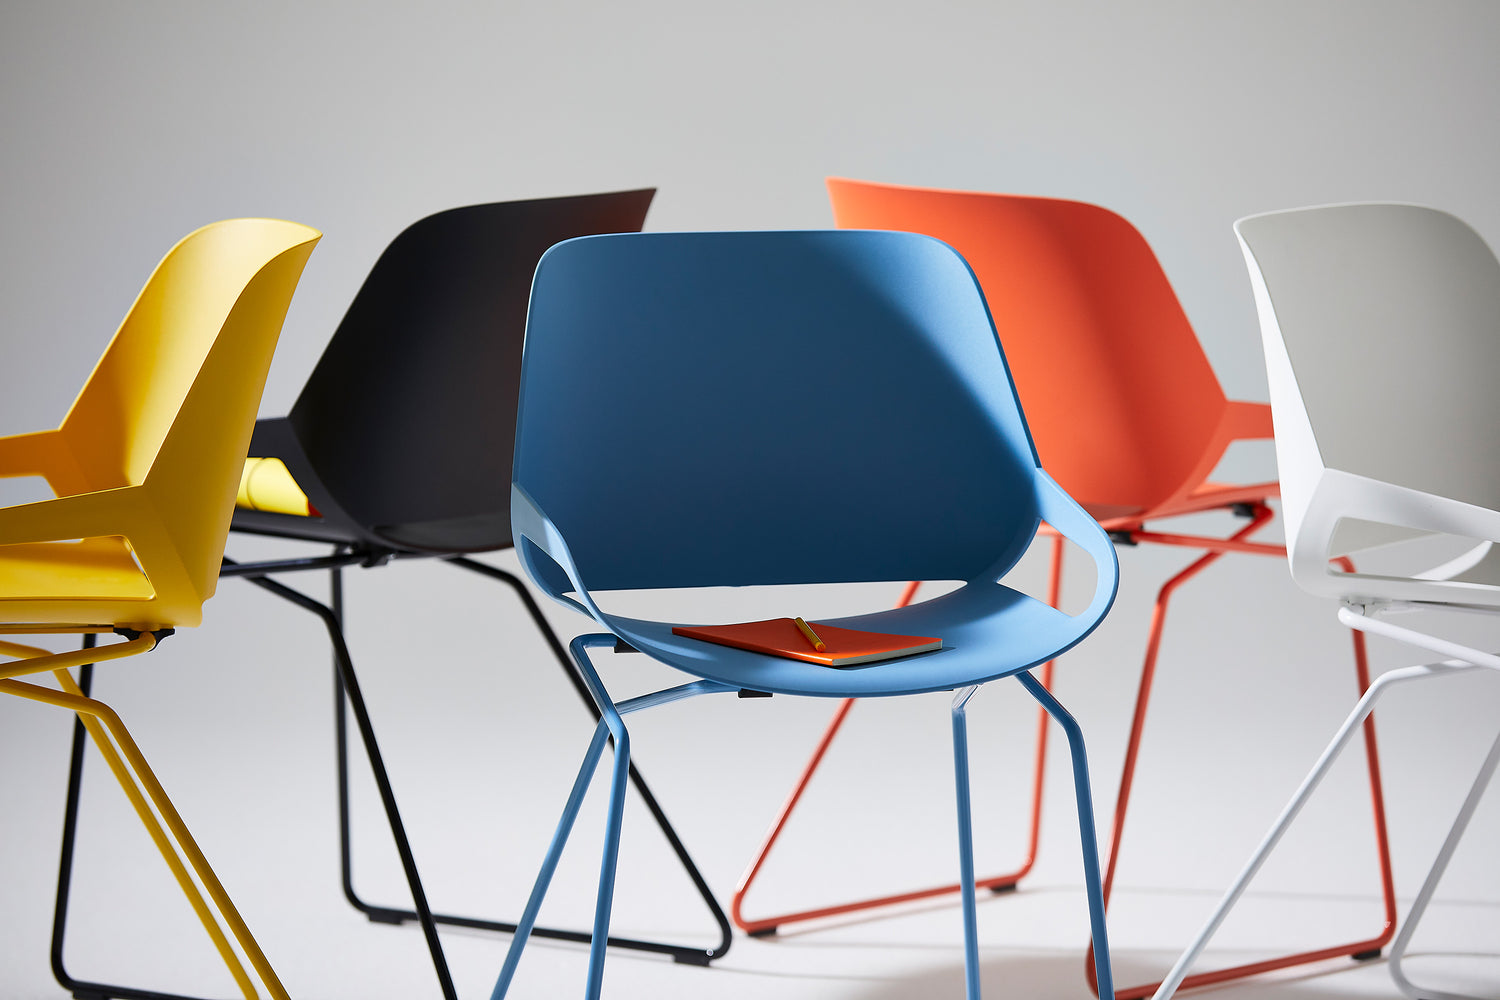 Aeris Numo design chair with skid base in bright colors